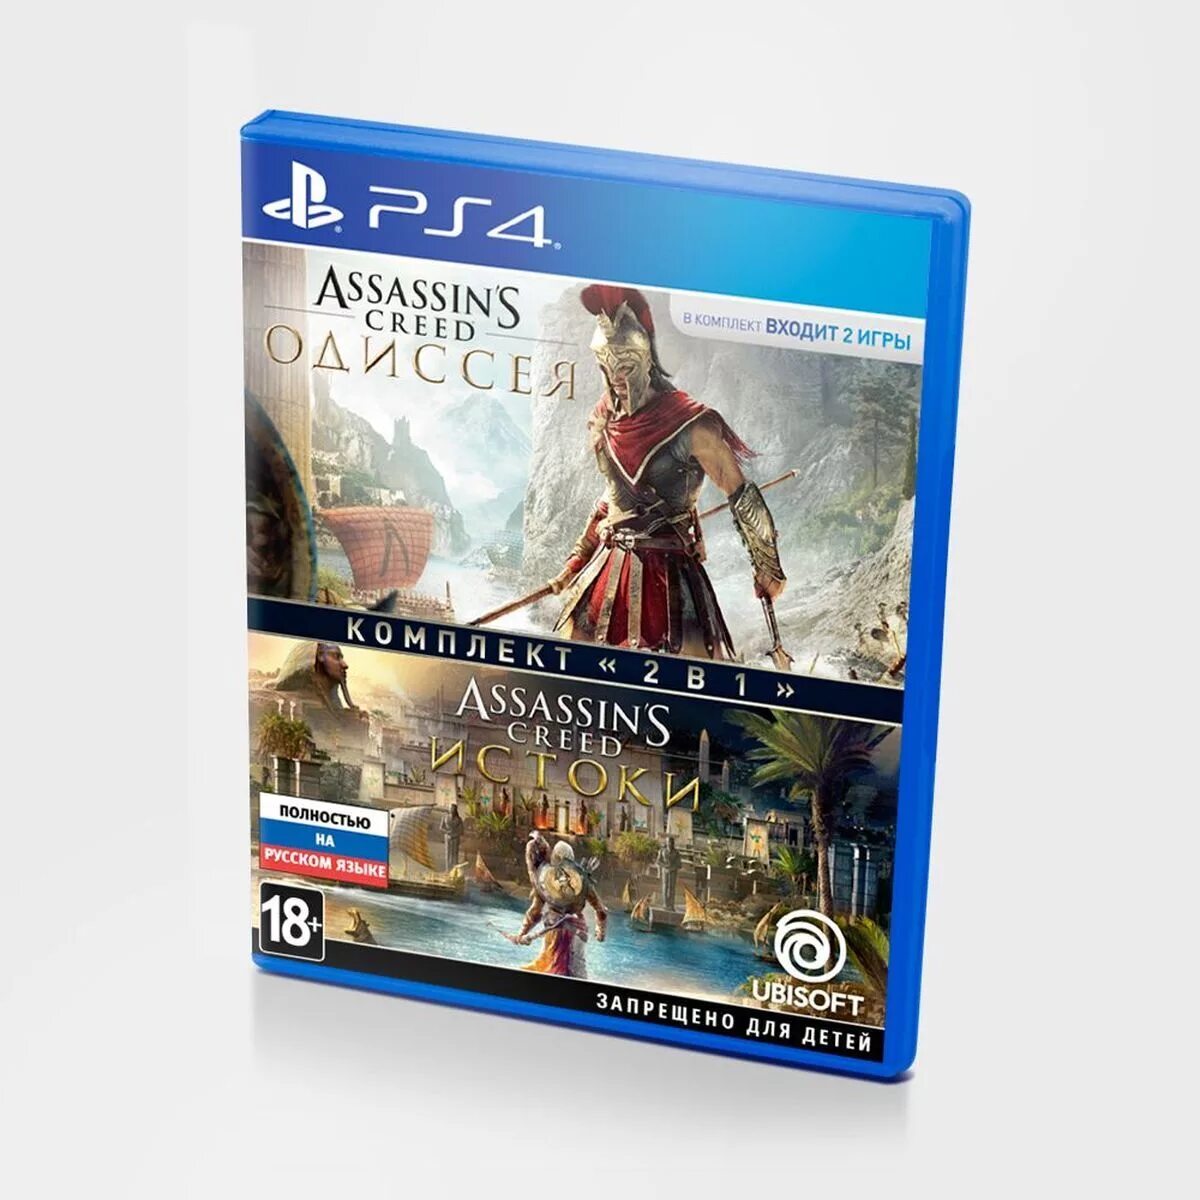 Ps4 диск Assassins Creed. Assassin's Creed Odyssey ps4 диск. Ассасин Истоки диск ps4. Ассасин Истоки Одиссея 2в1 диск.